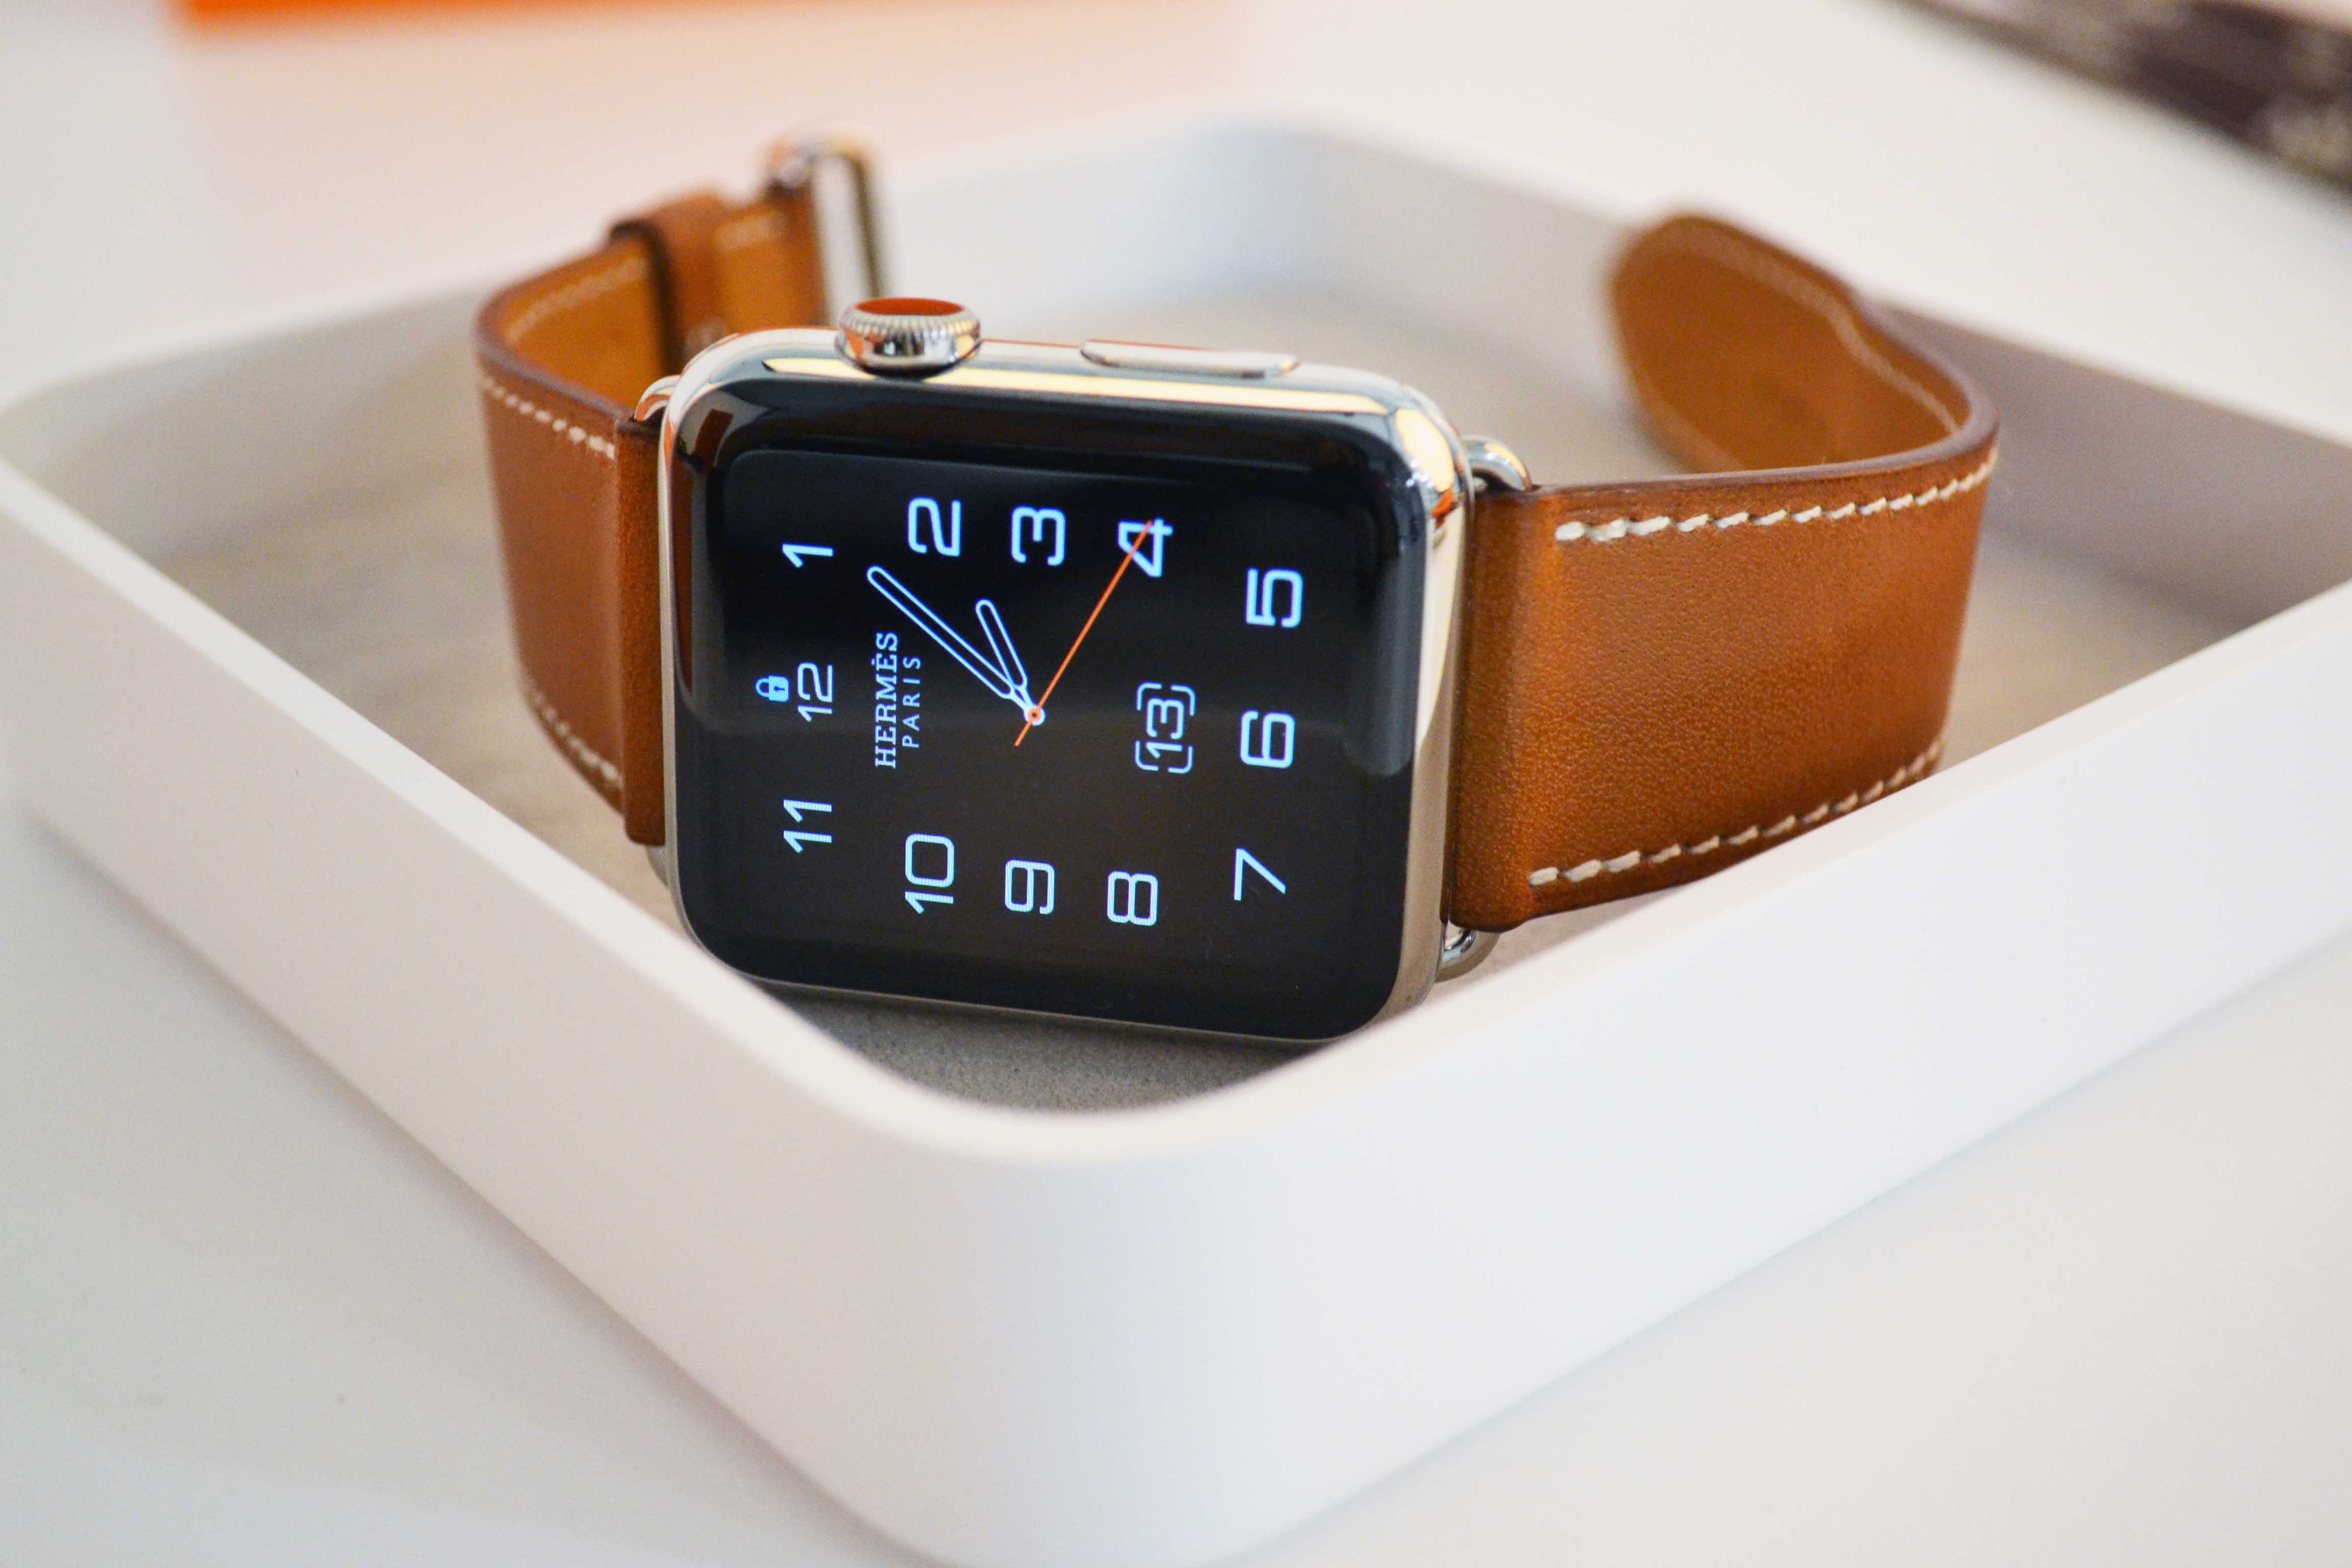 The Hermès Apple Watch - Haute Time Review